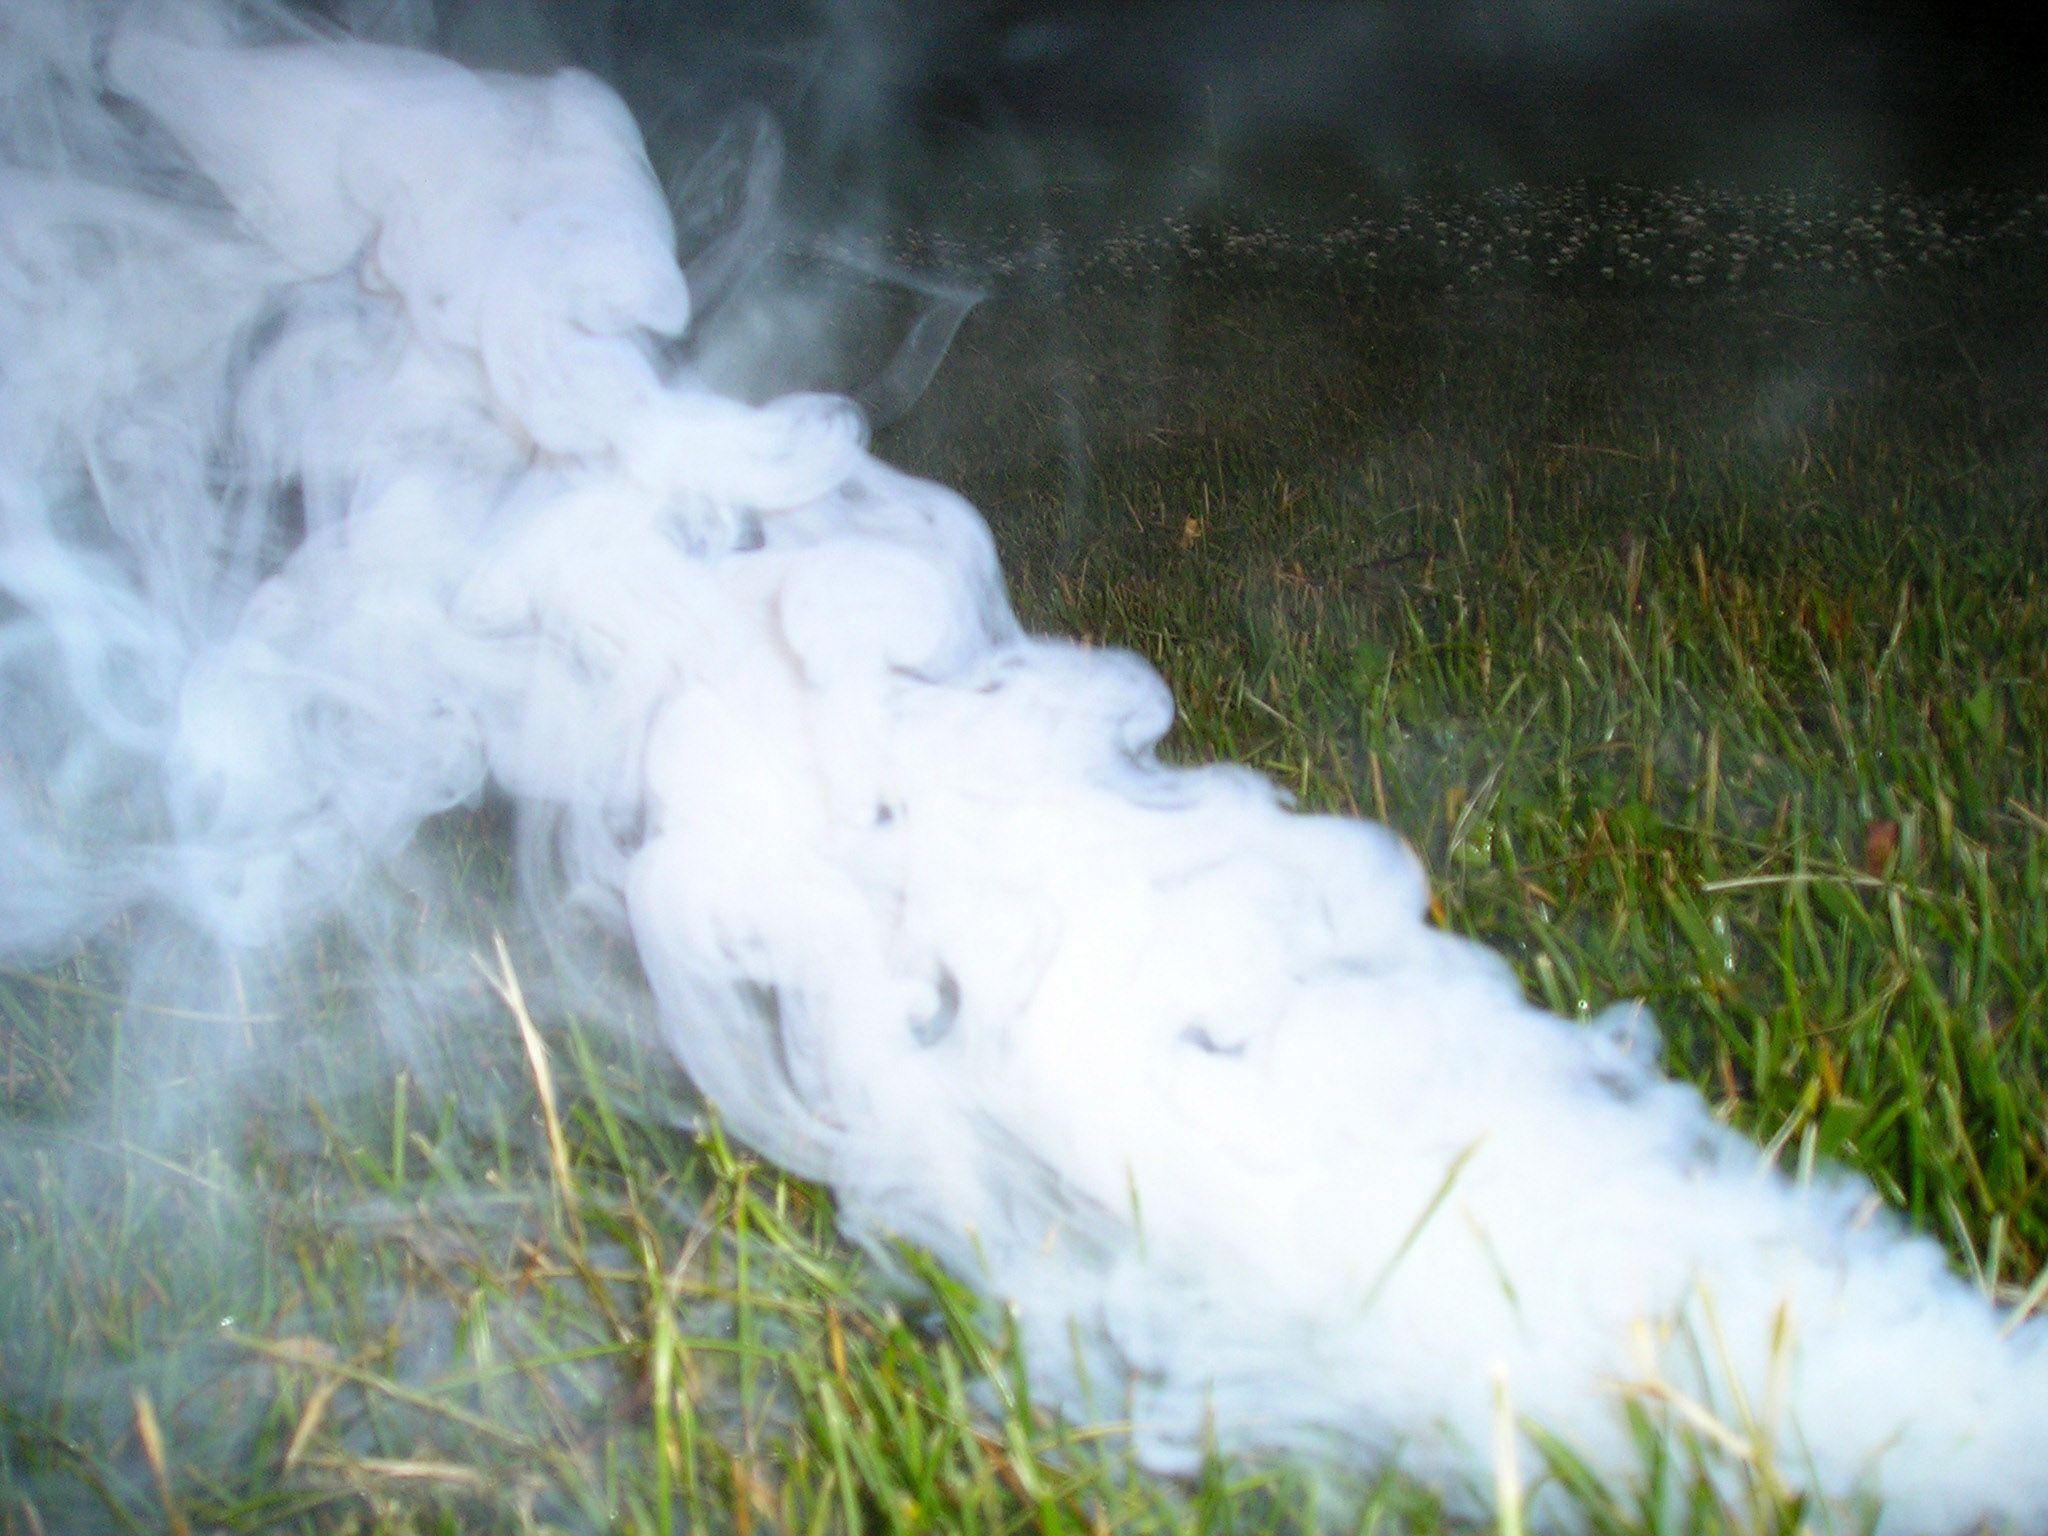 How To Make a Smoke Bomb Without Potassium Nitrate or Ping Pong Balls